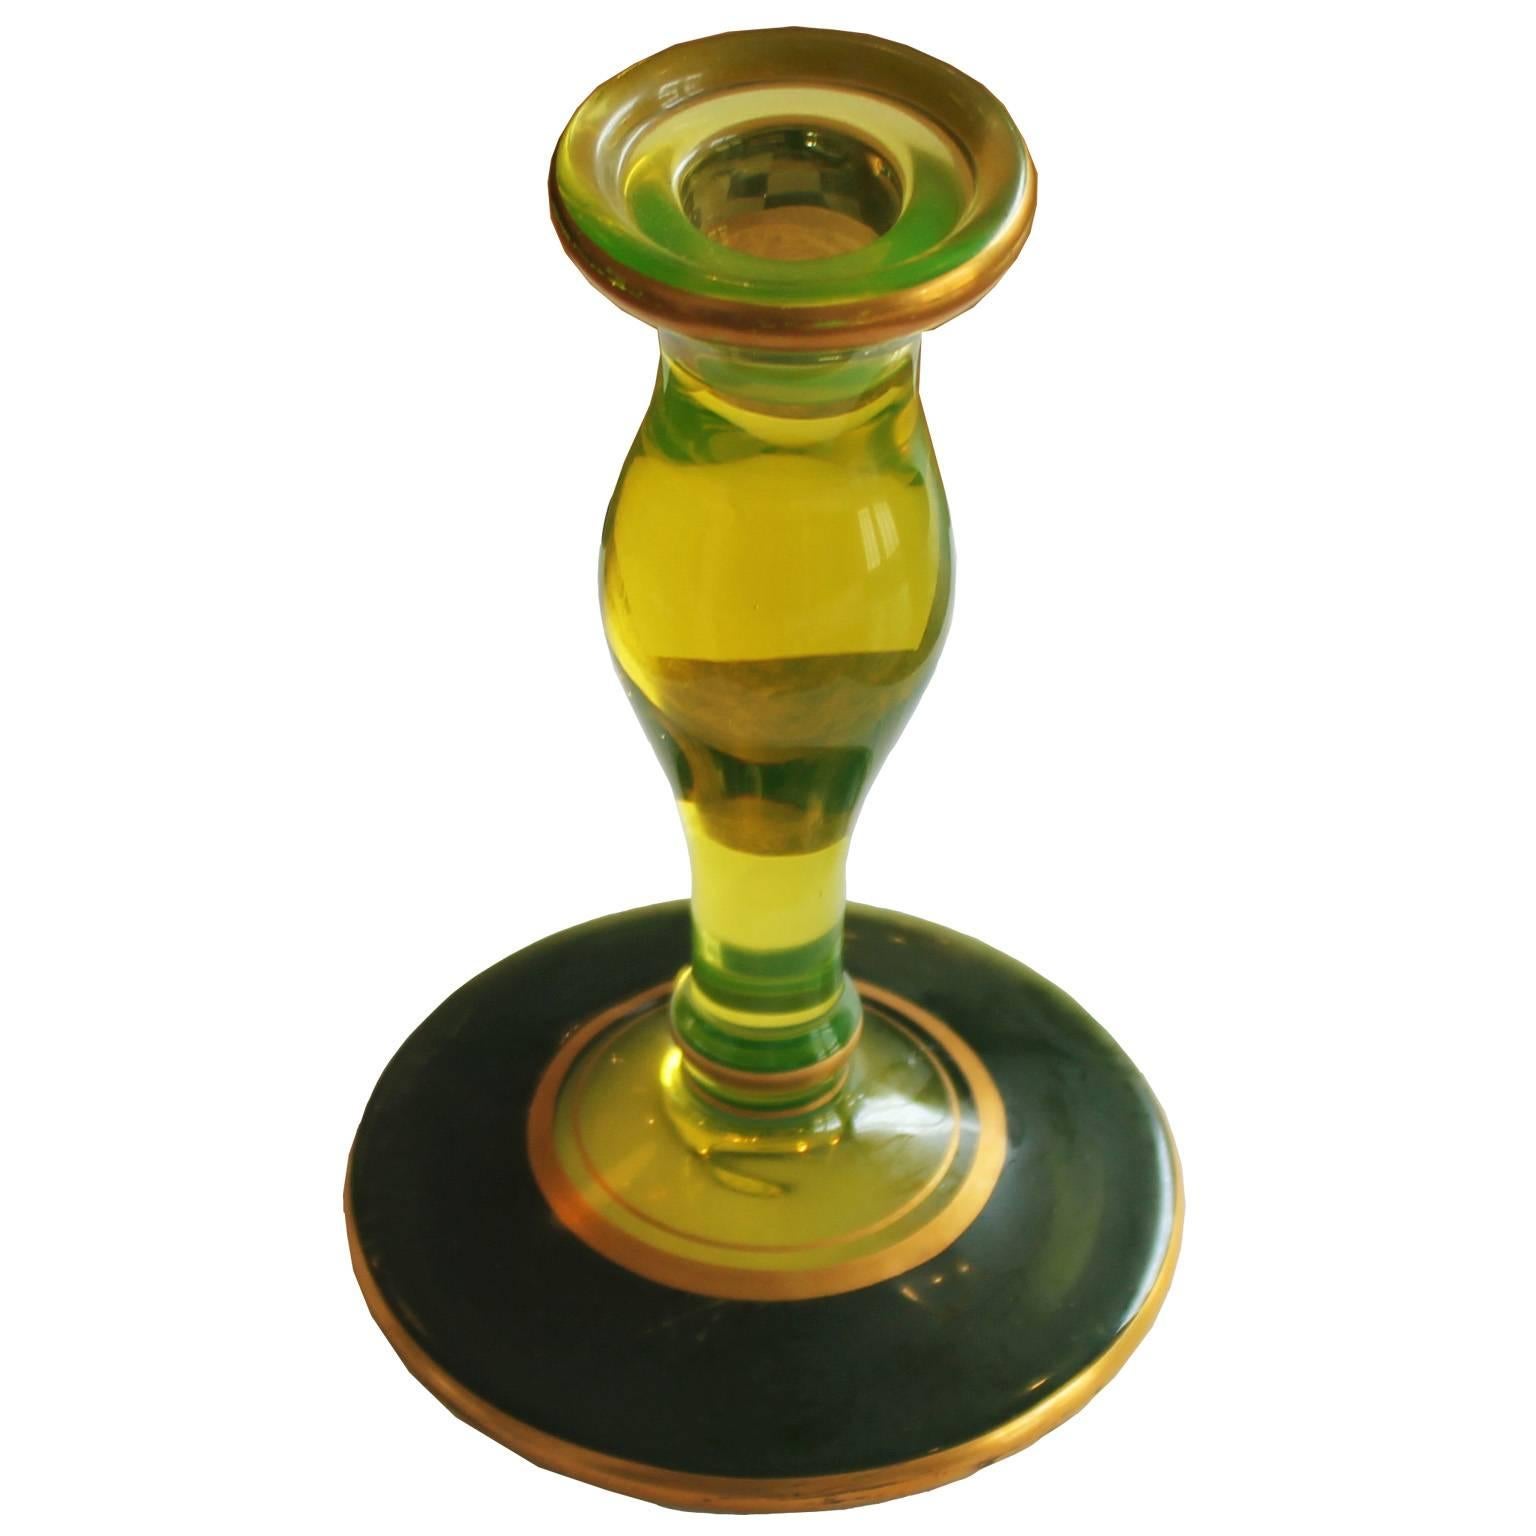 Charming pair of glass candlesticks in the style of Murano. Glass is a bright lime green and is accented with black and gold gilt. Perfect addition to a Hollywood Regency or modern interior.